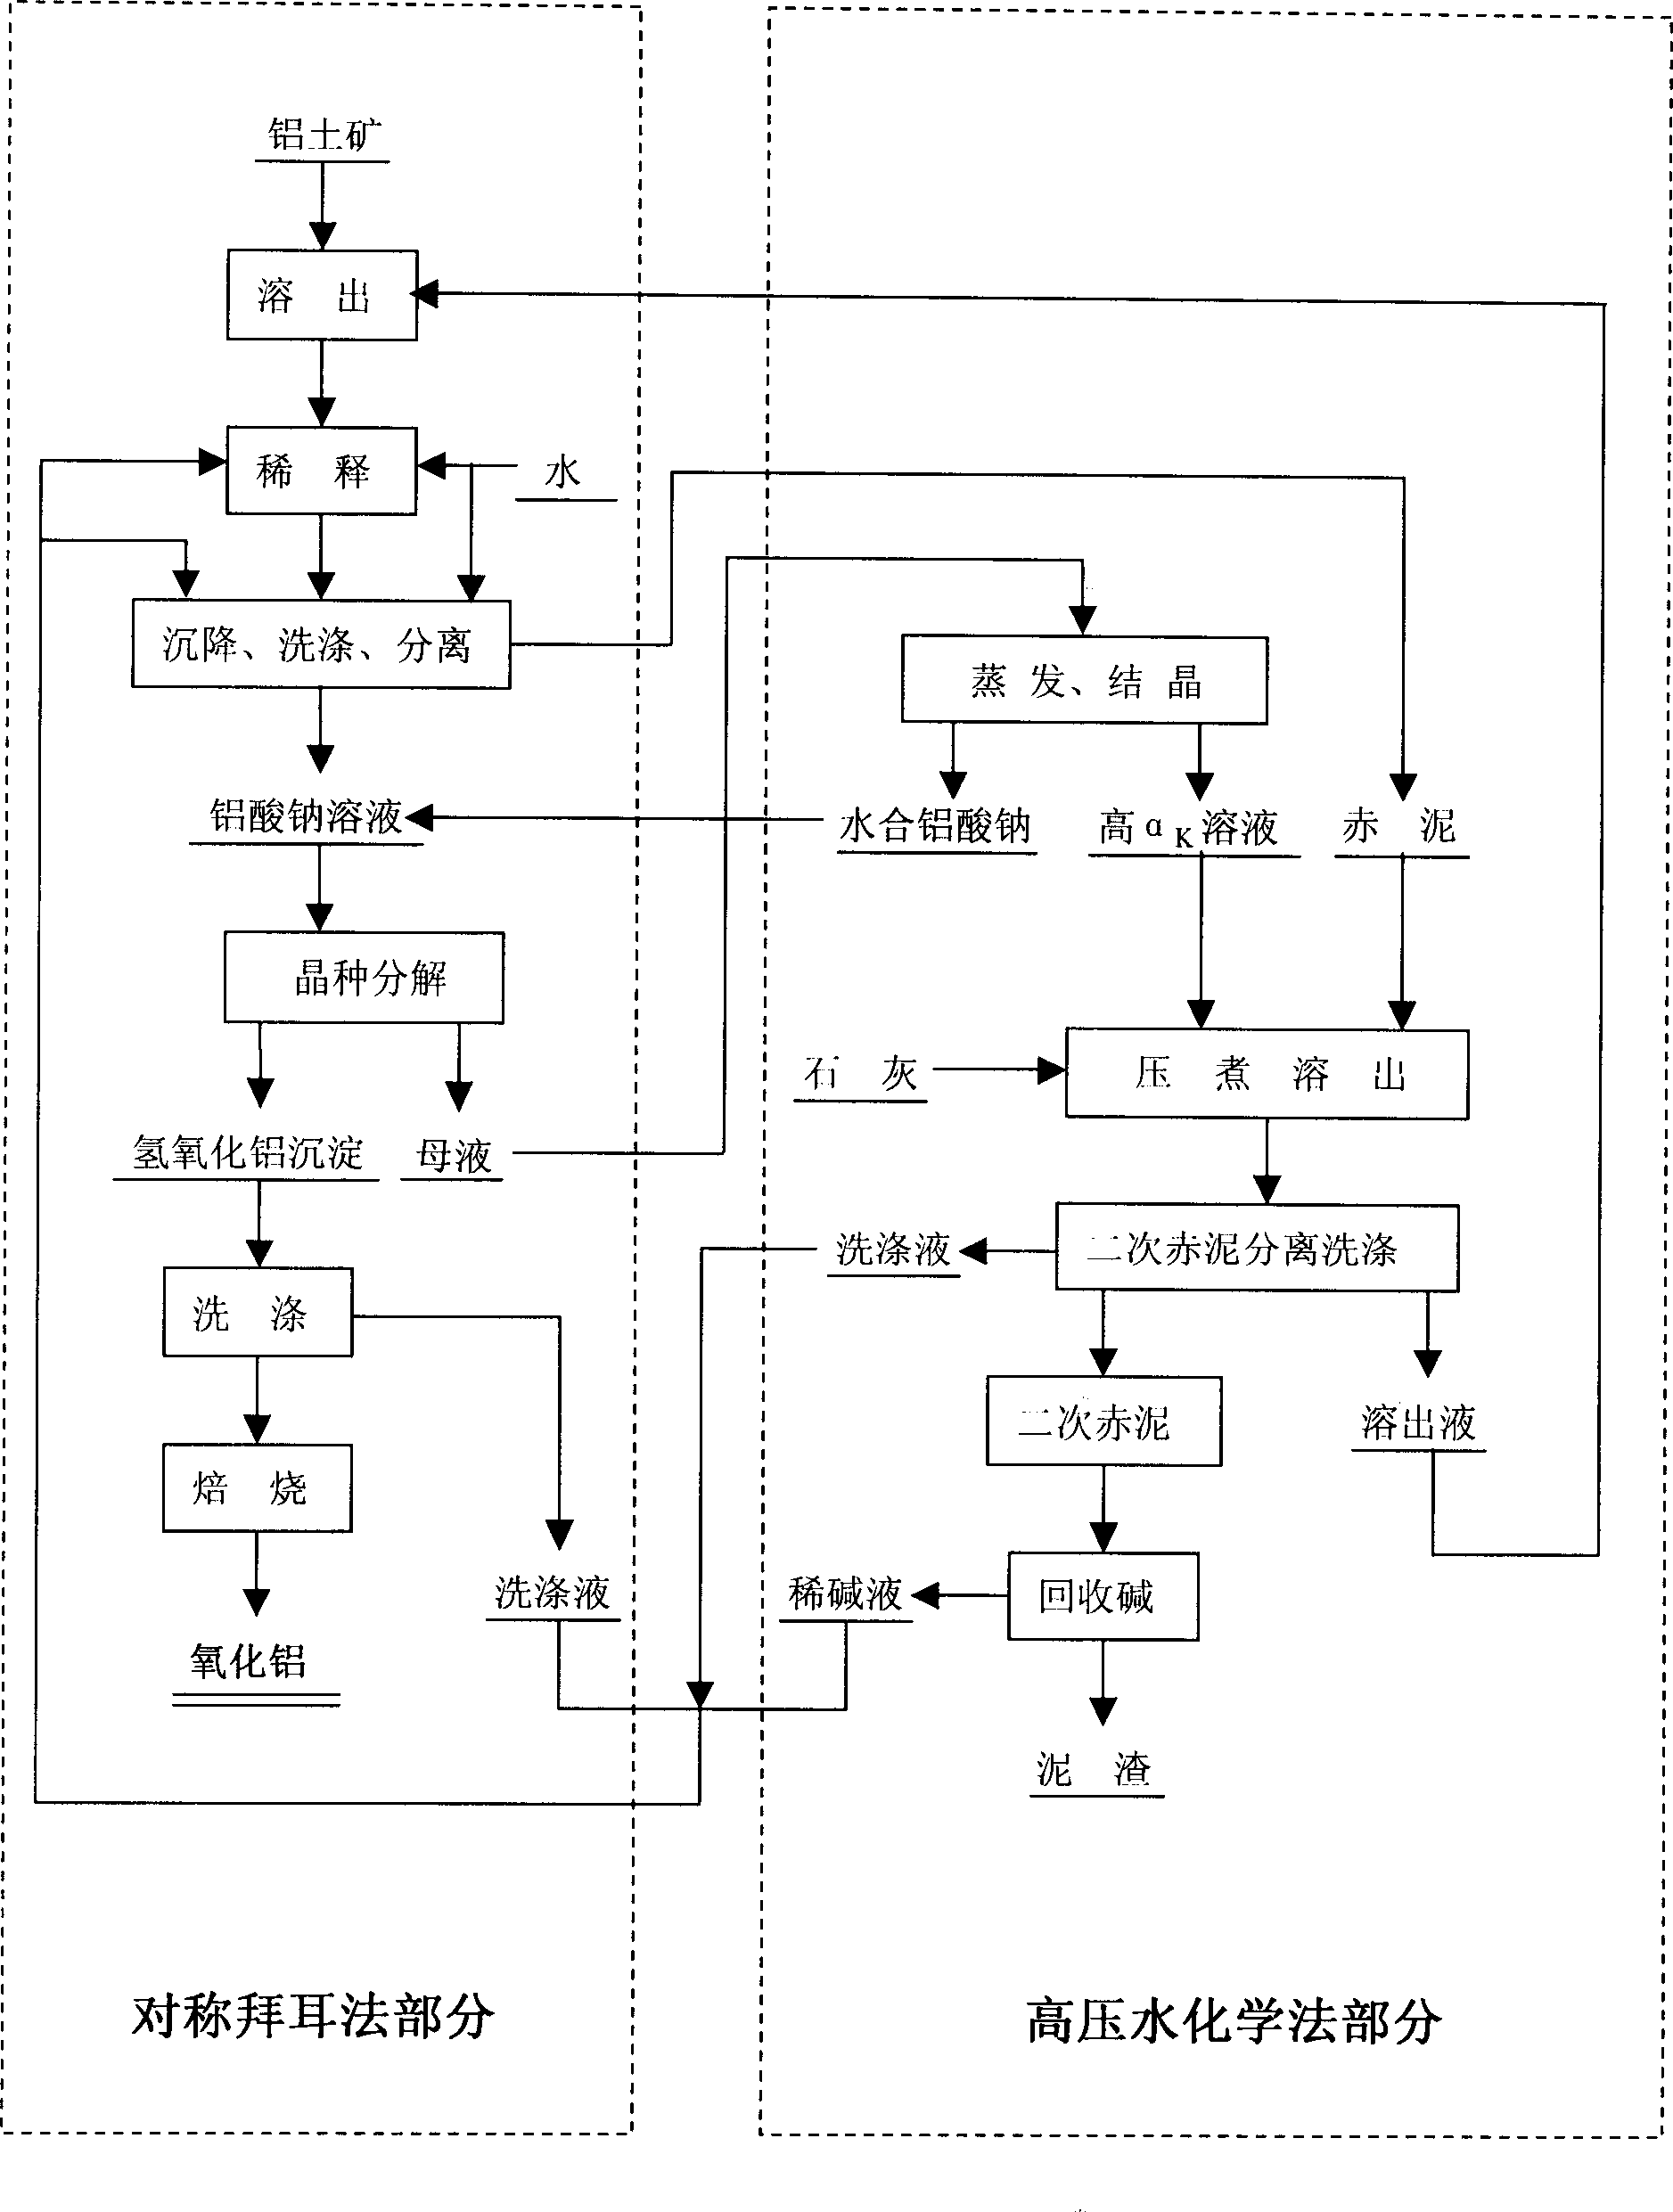 Method for extracting alumina from high silicon bauxite